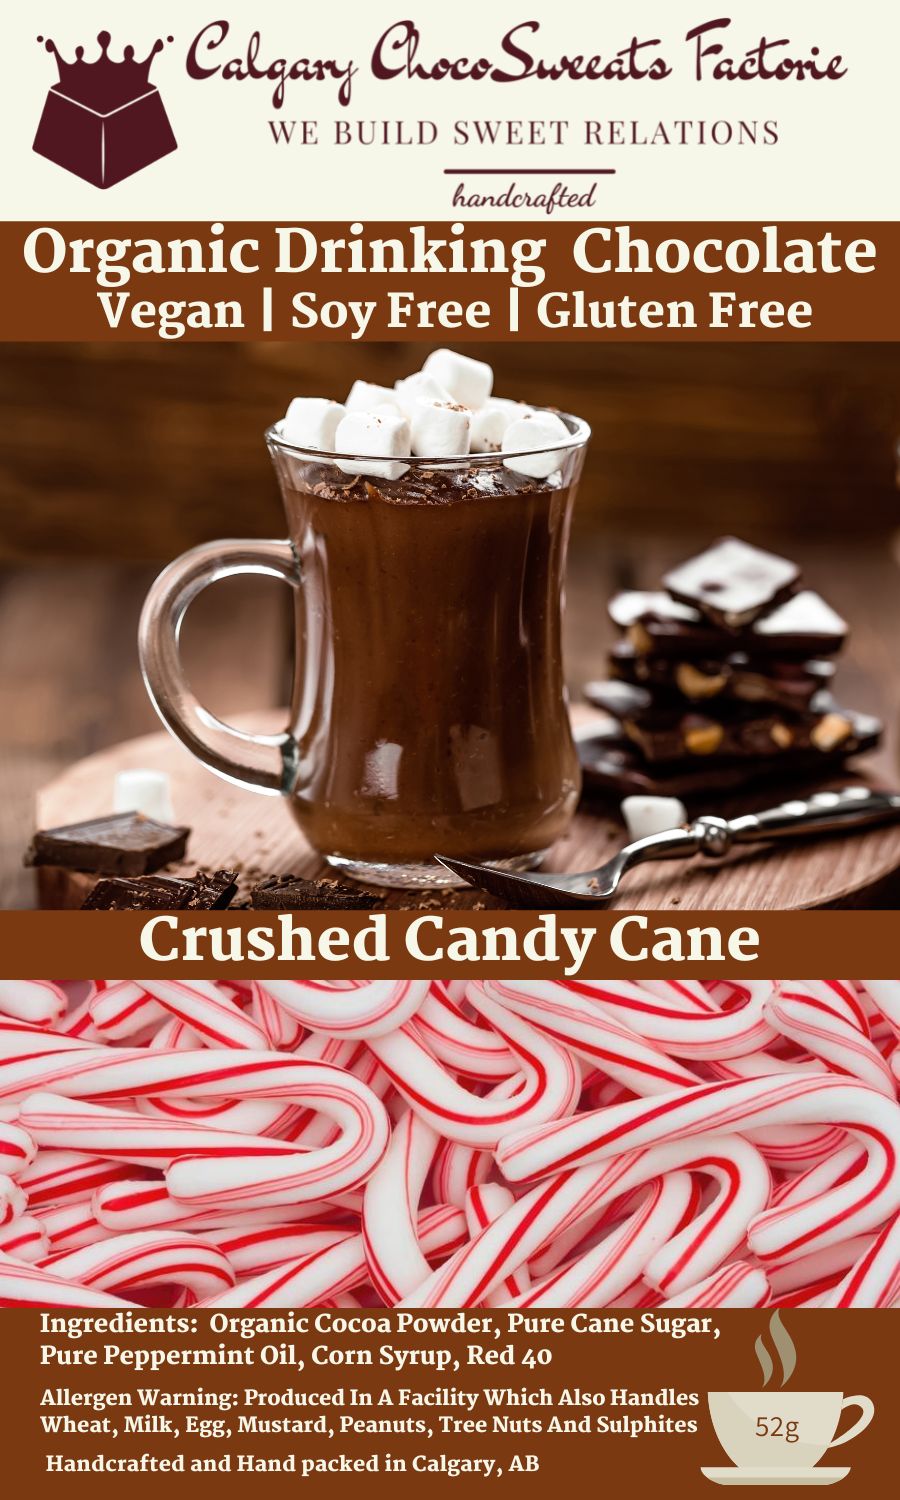 Crushed Candy Cane - Organic Drinking Chocolate